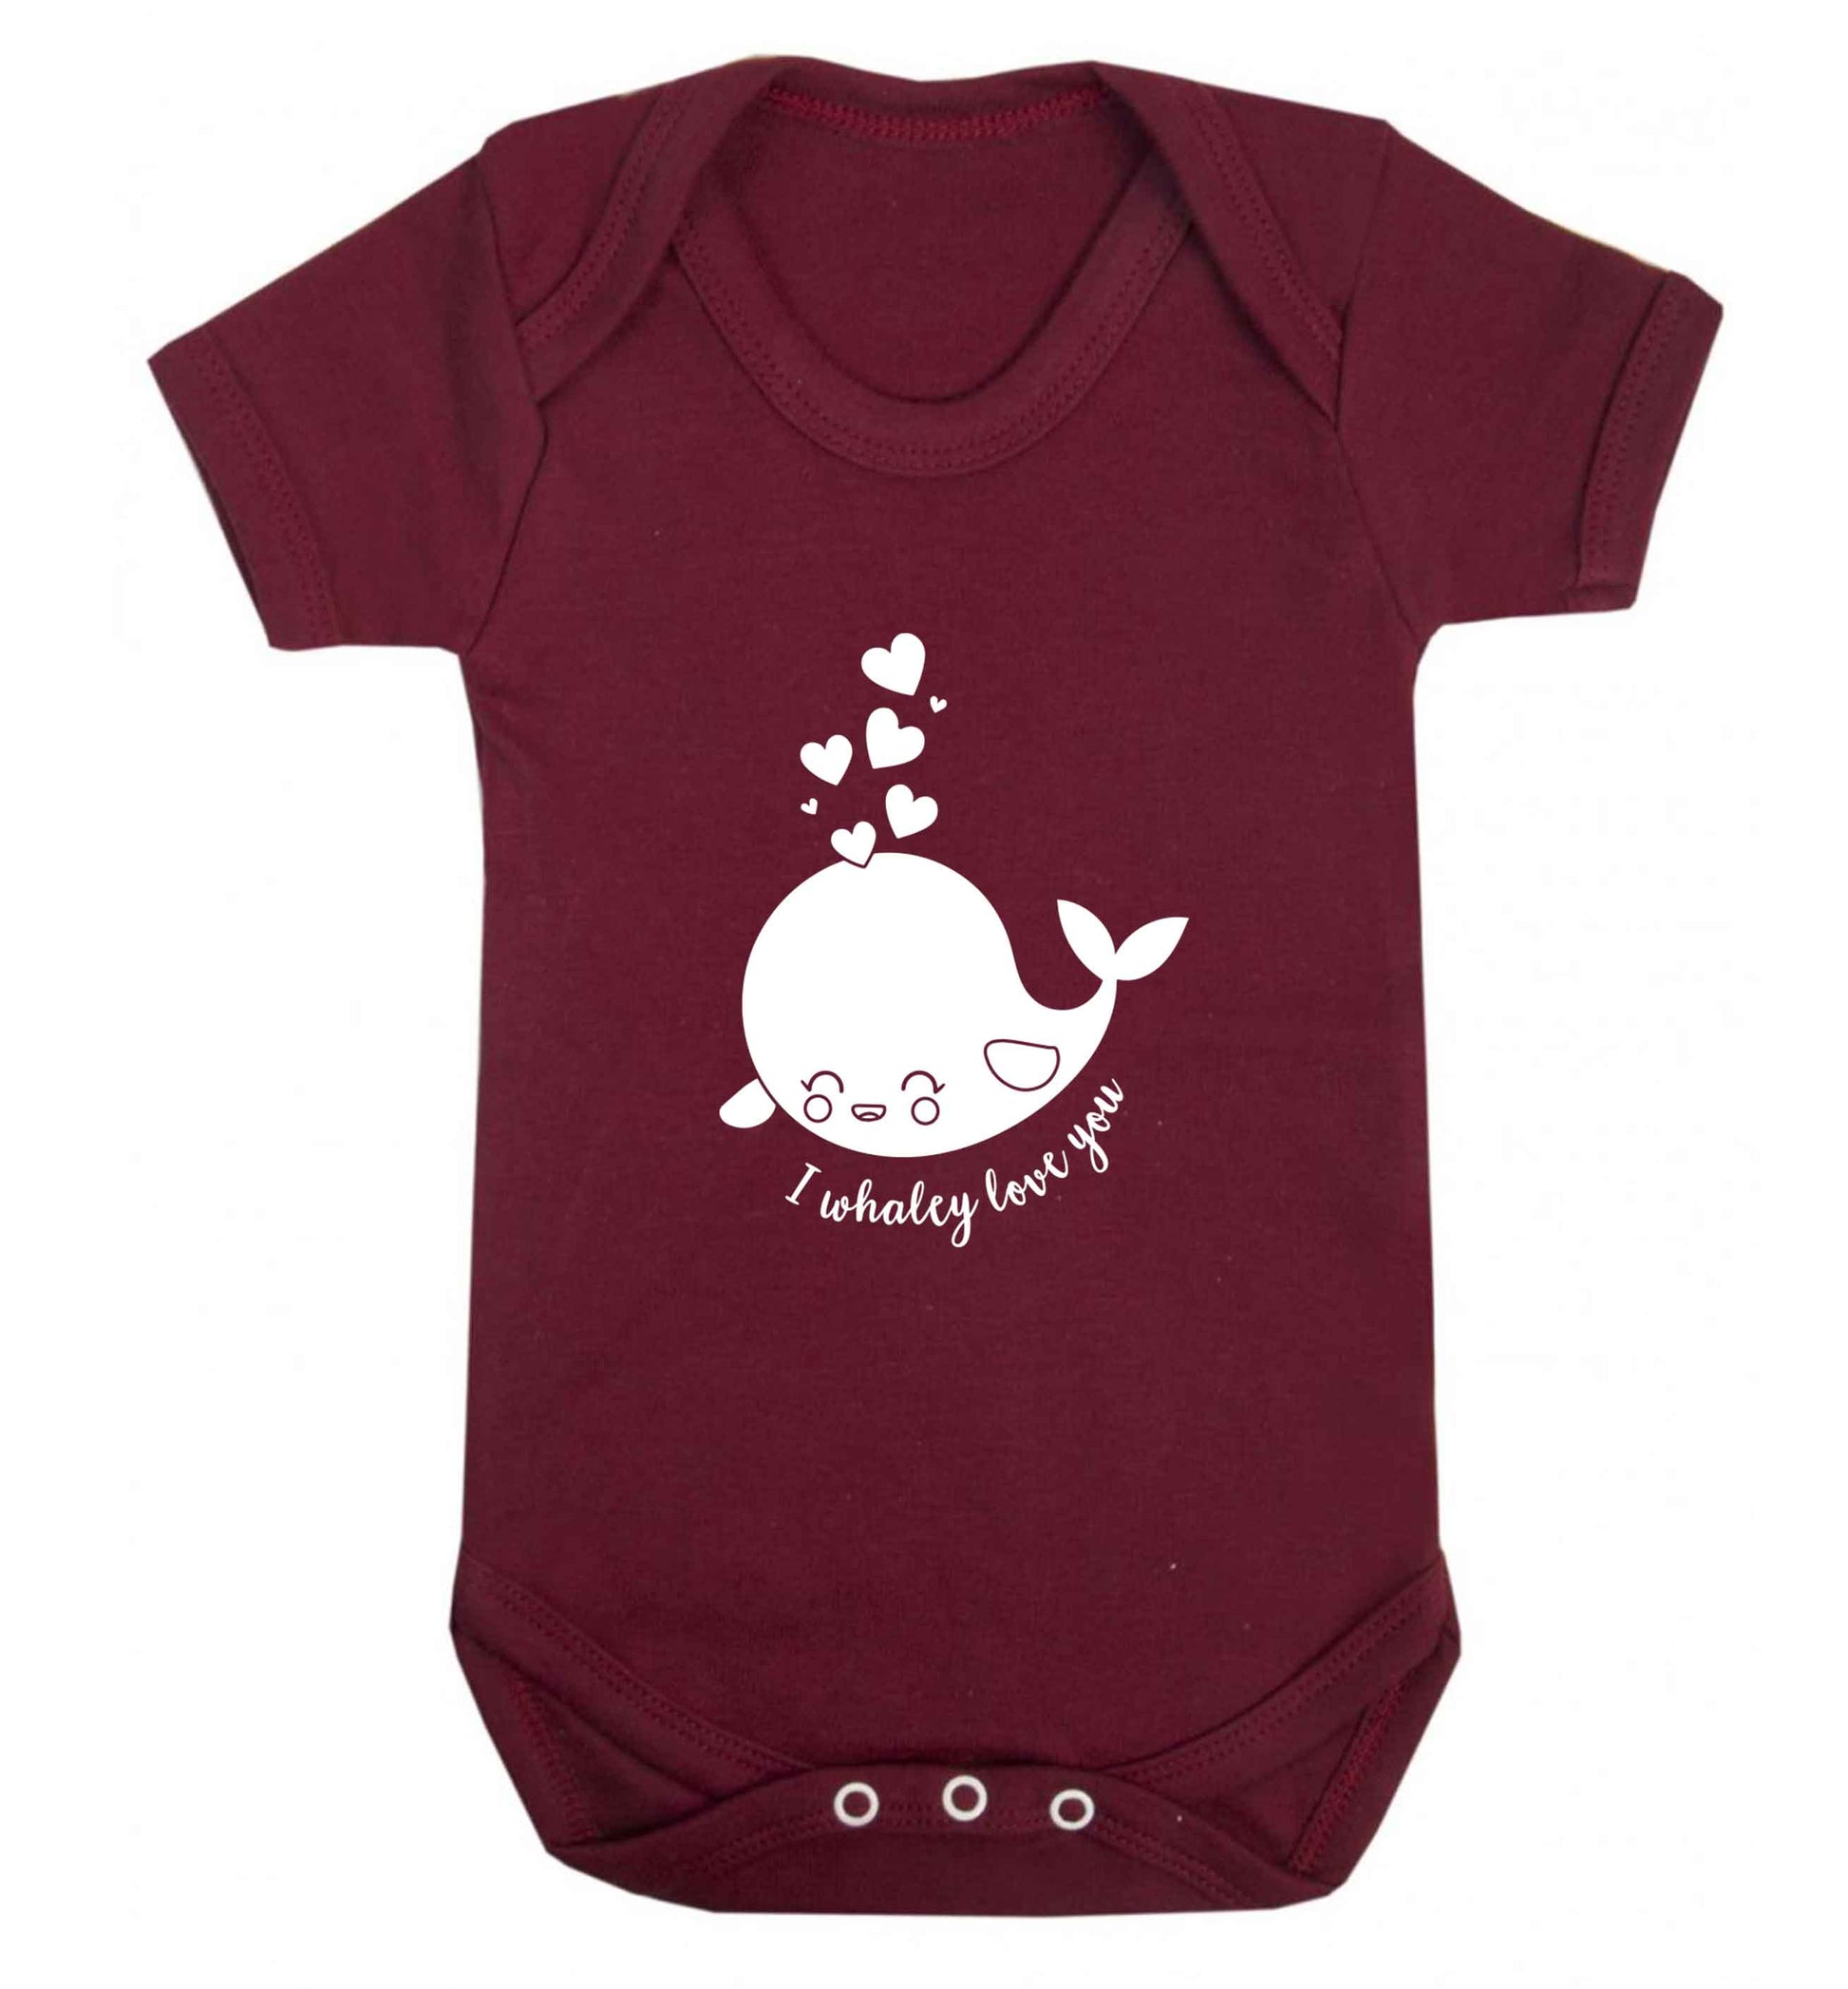 I whaley love you baby vest maroon 18-24 months